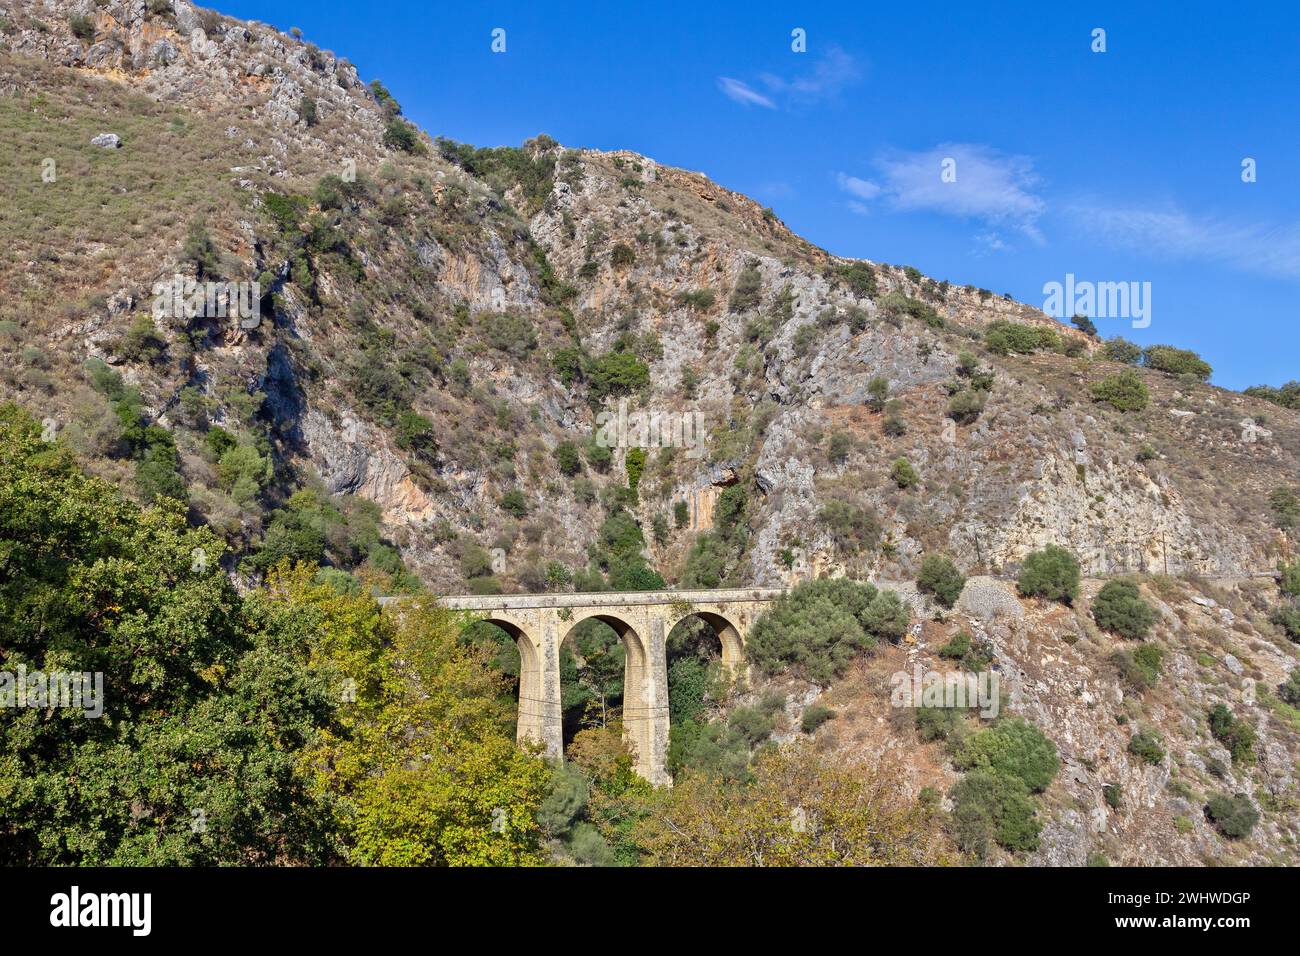 The bridge of Sima in Crete island, the highest built bridge in Crete and a construction miracle for the time it was built. Stock Photo